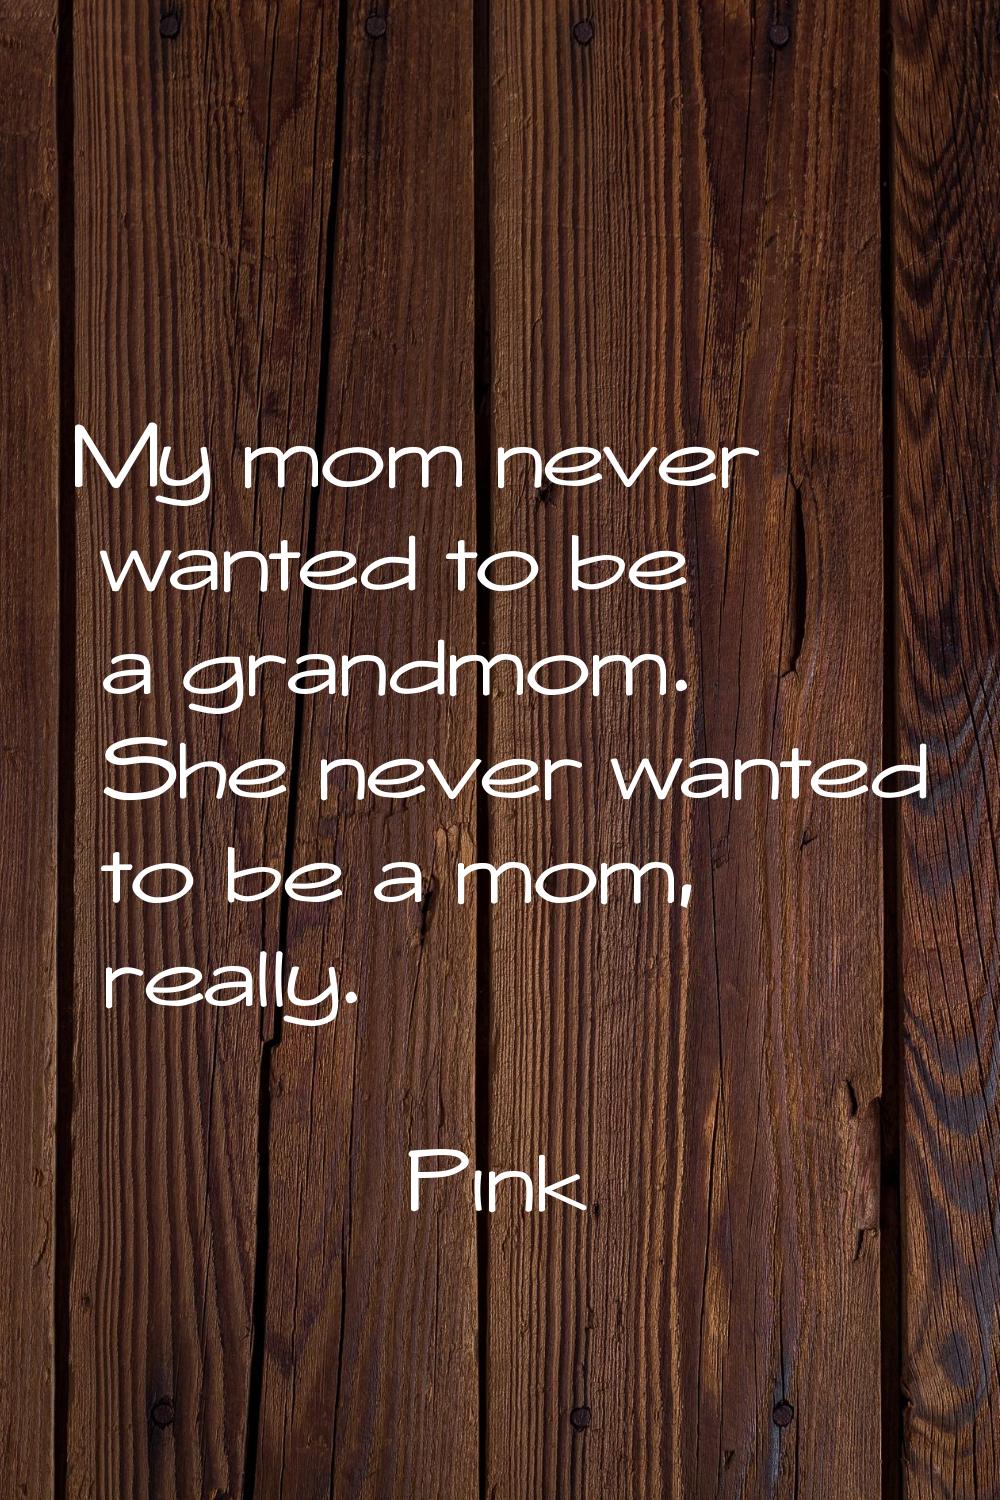 My mom never wanted to be a grandmom. She never wanted to be a mom, really.